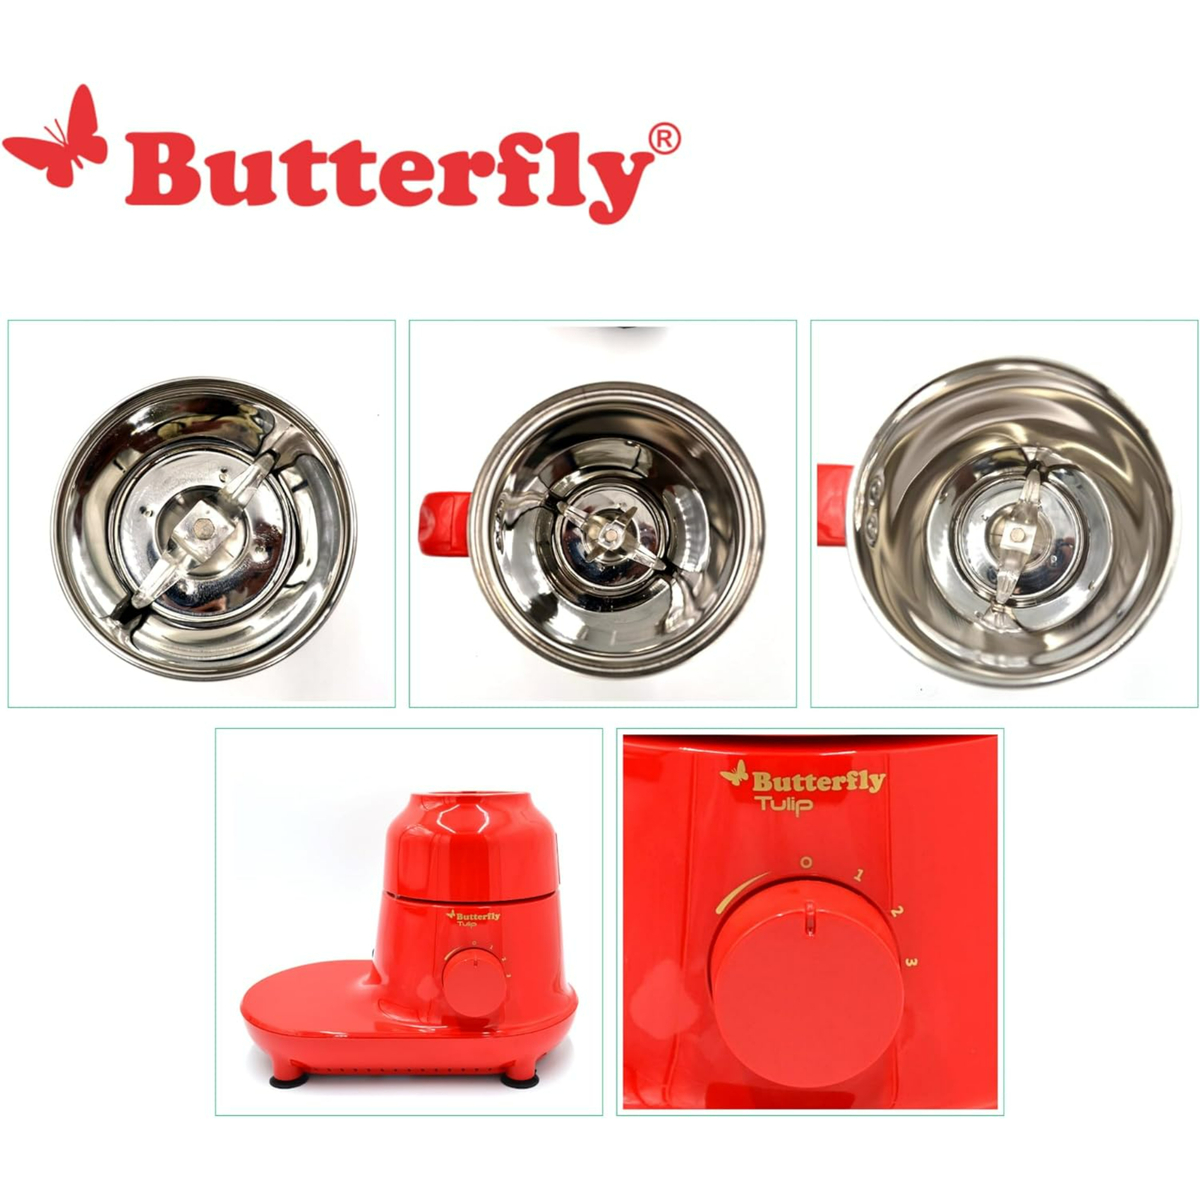 Butterfly Tulip Mixer Grinder, 600 W